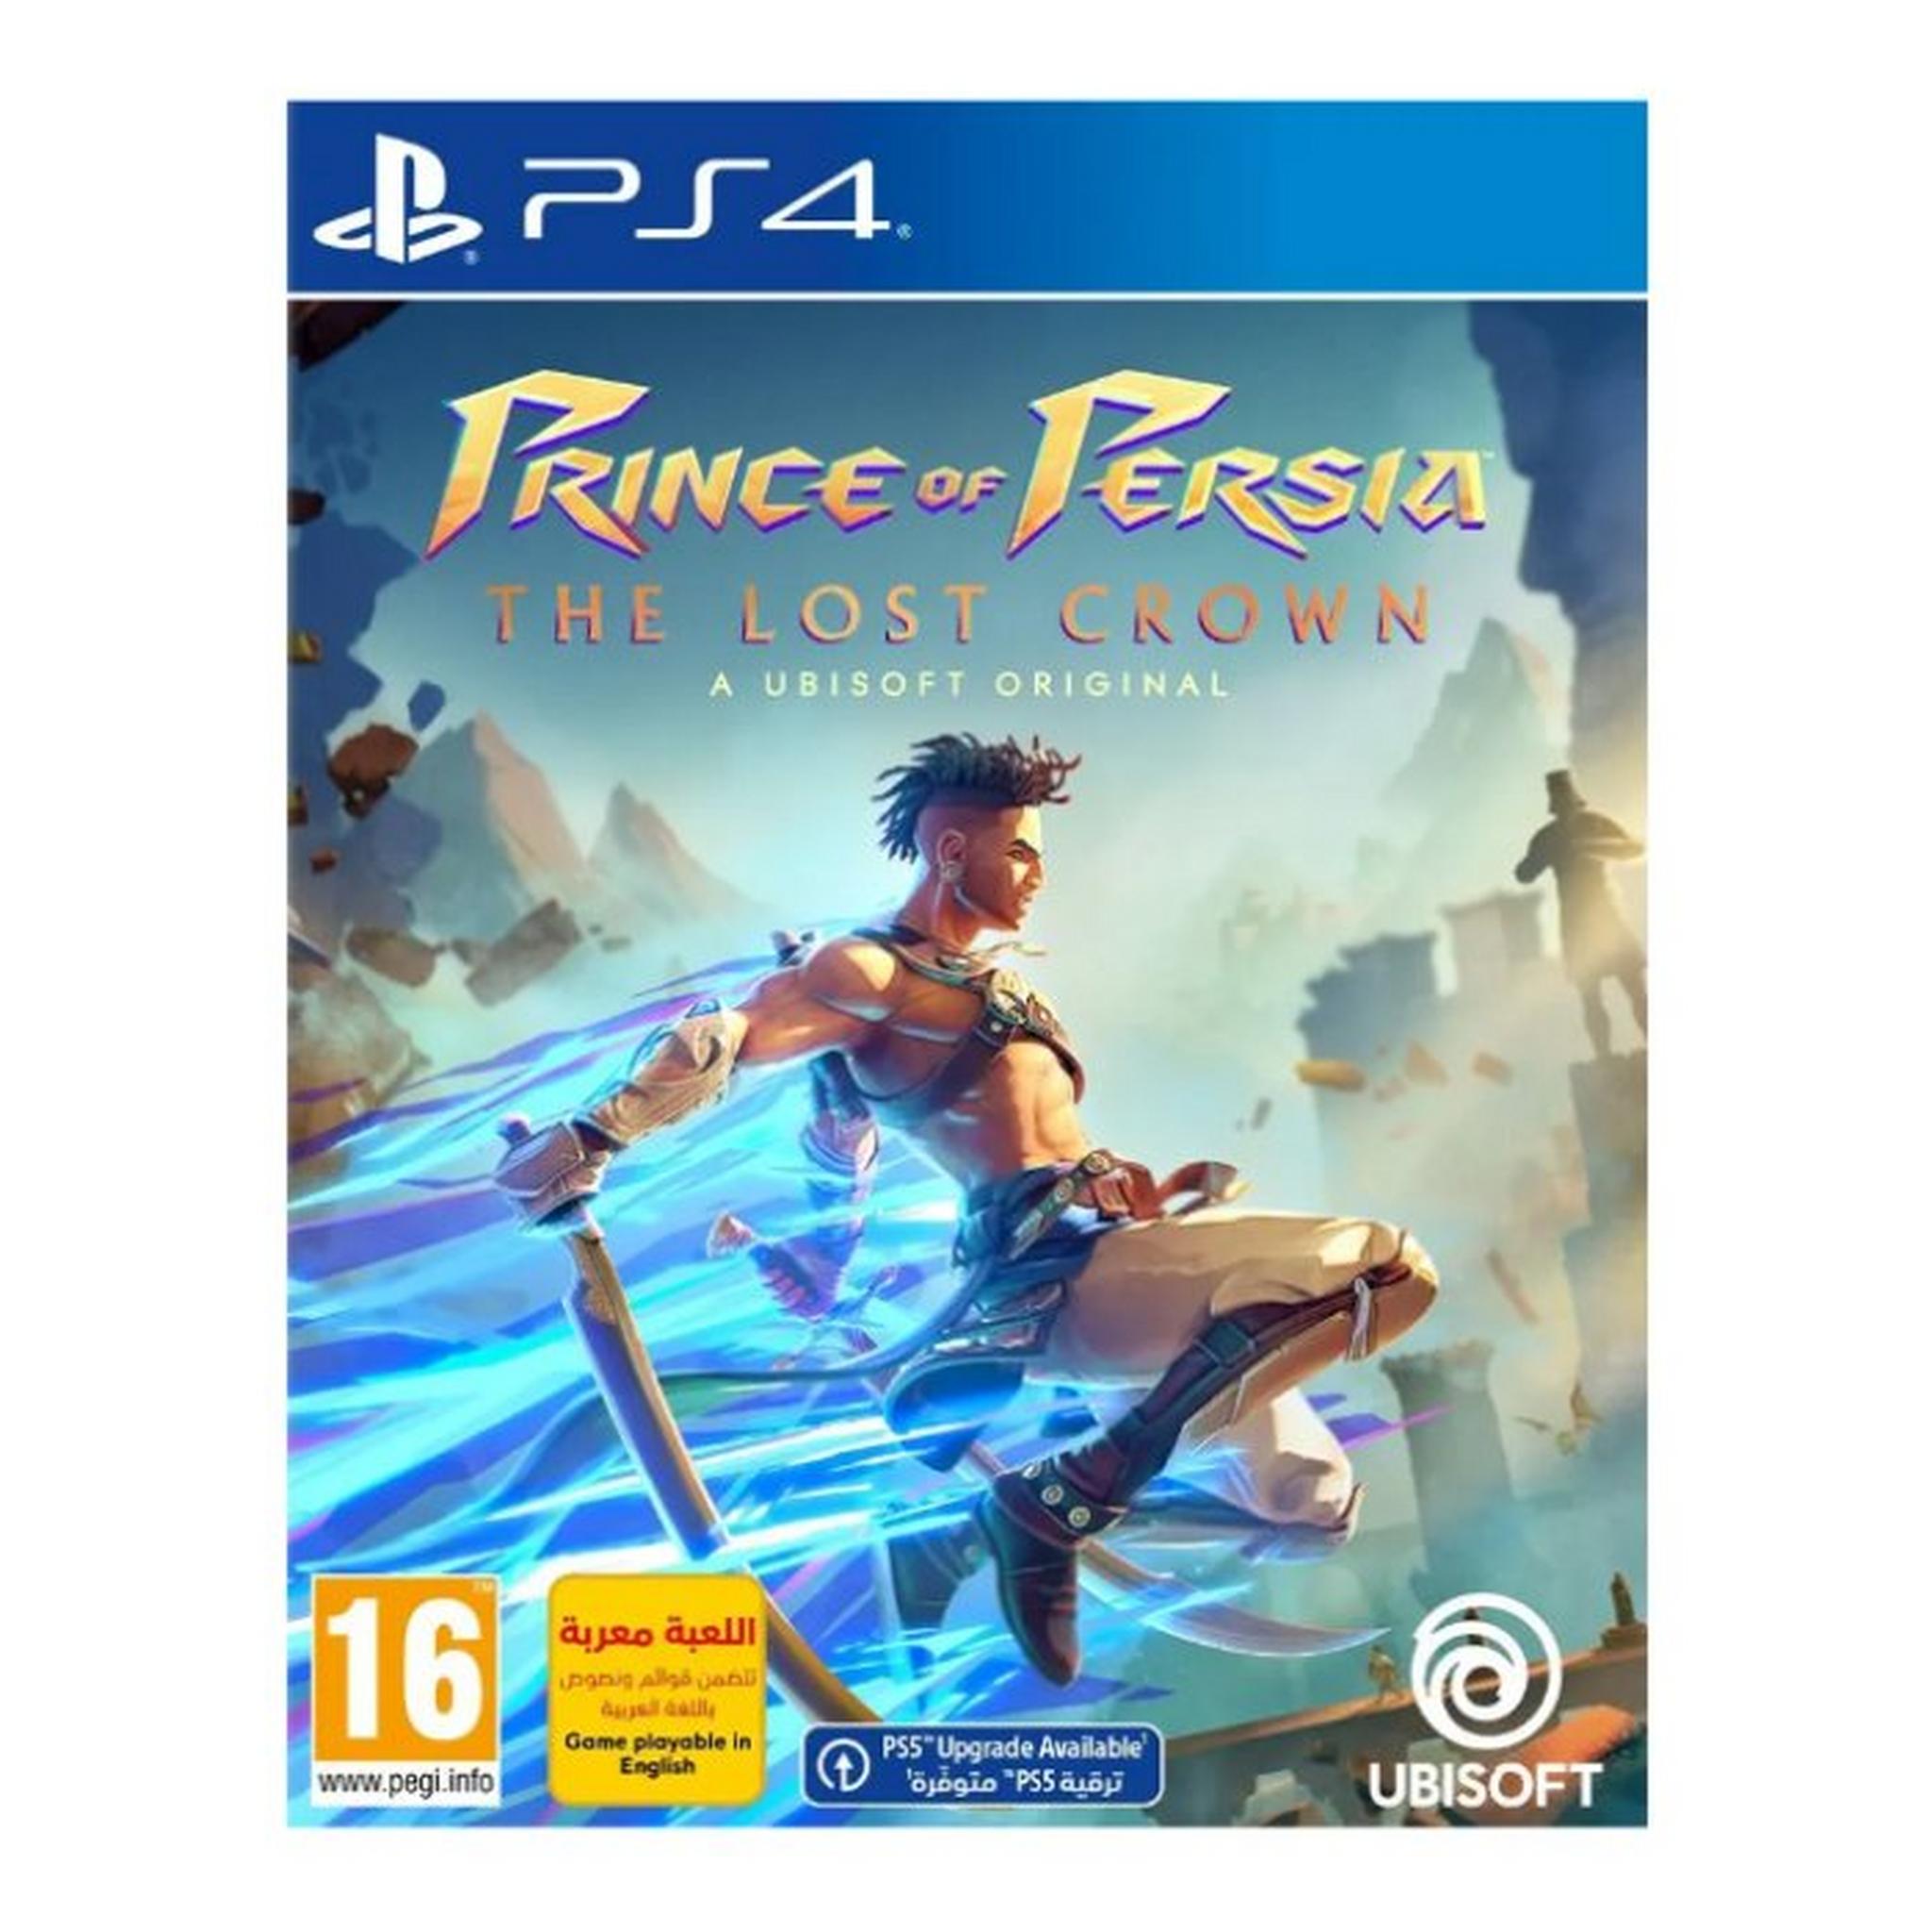 Prince Of Persia the Lost Crown Game, Standard Edition, for Playstation 4